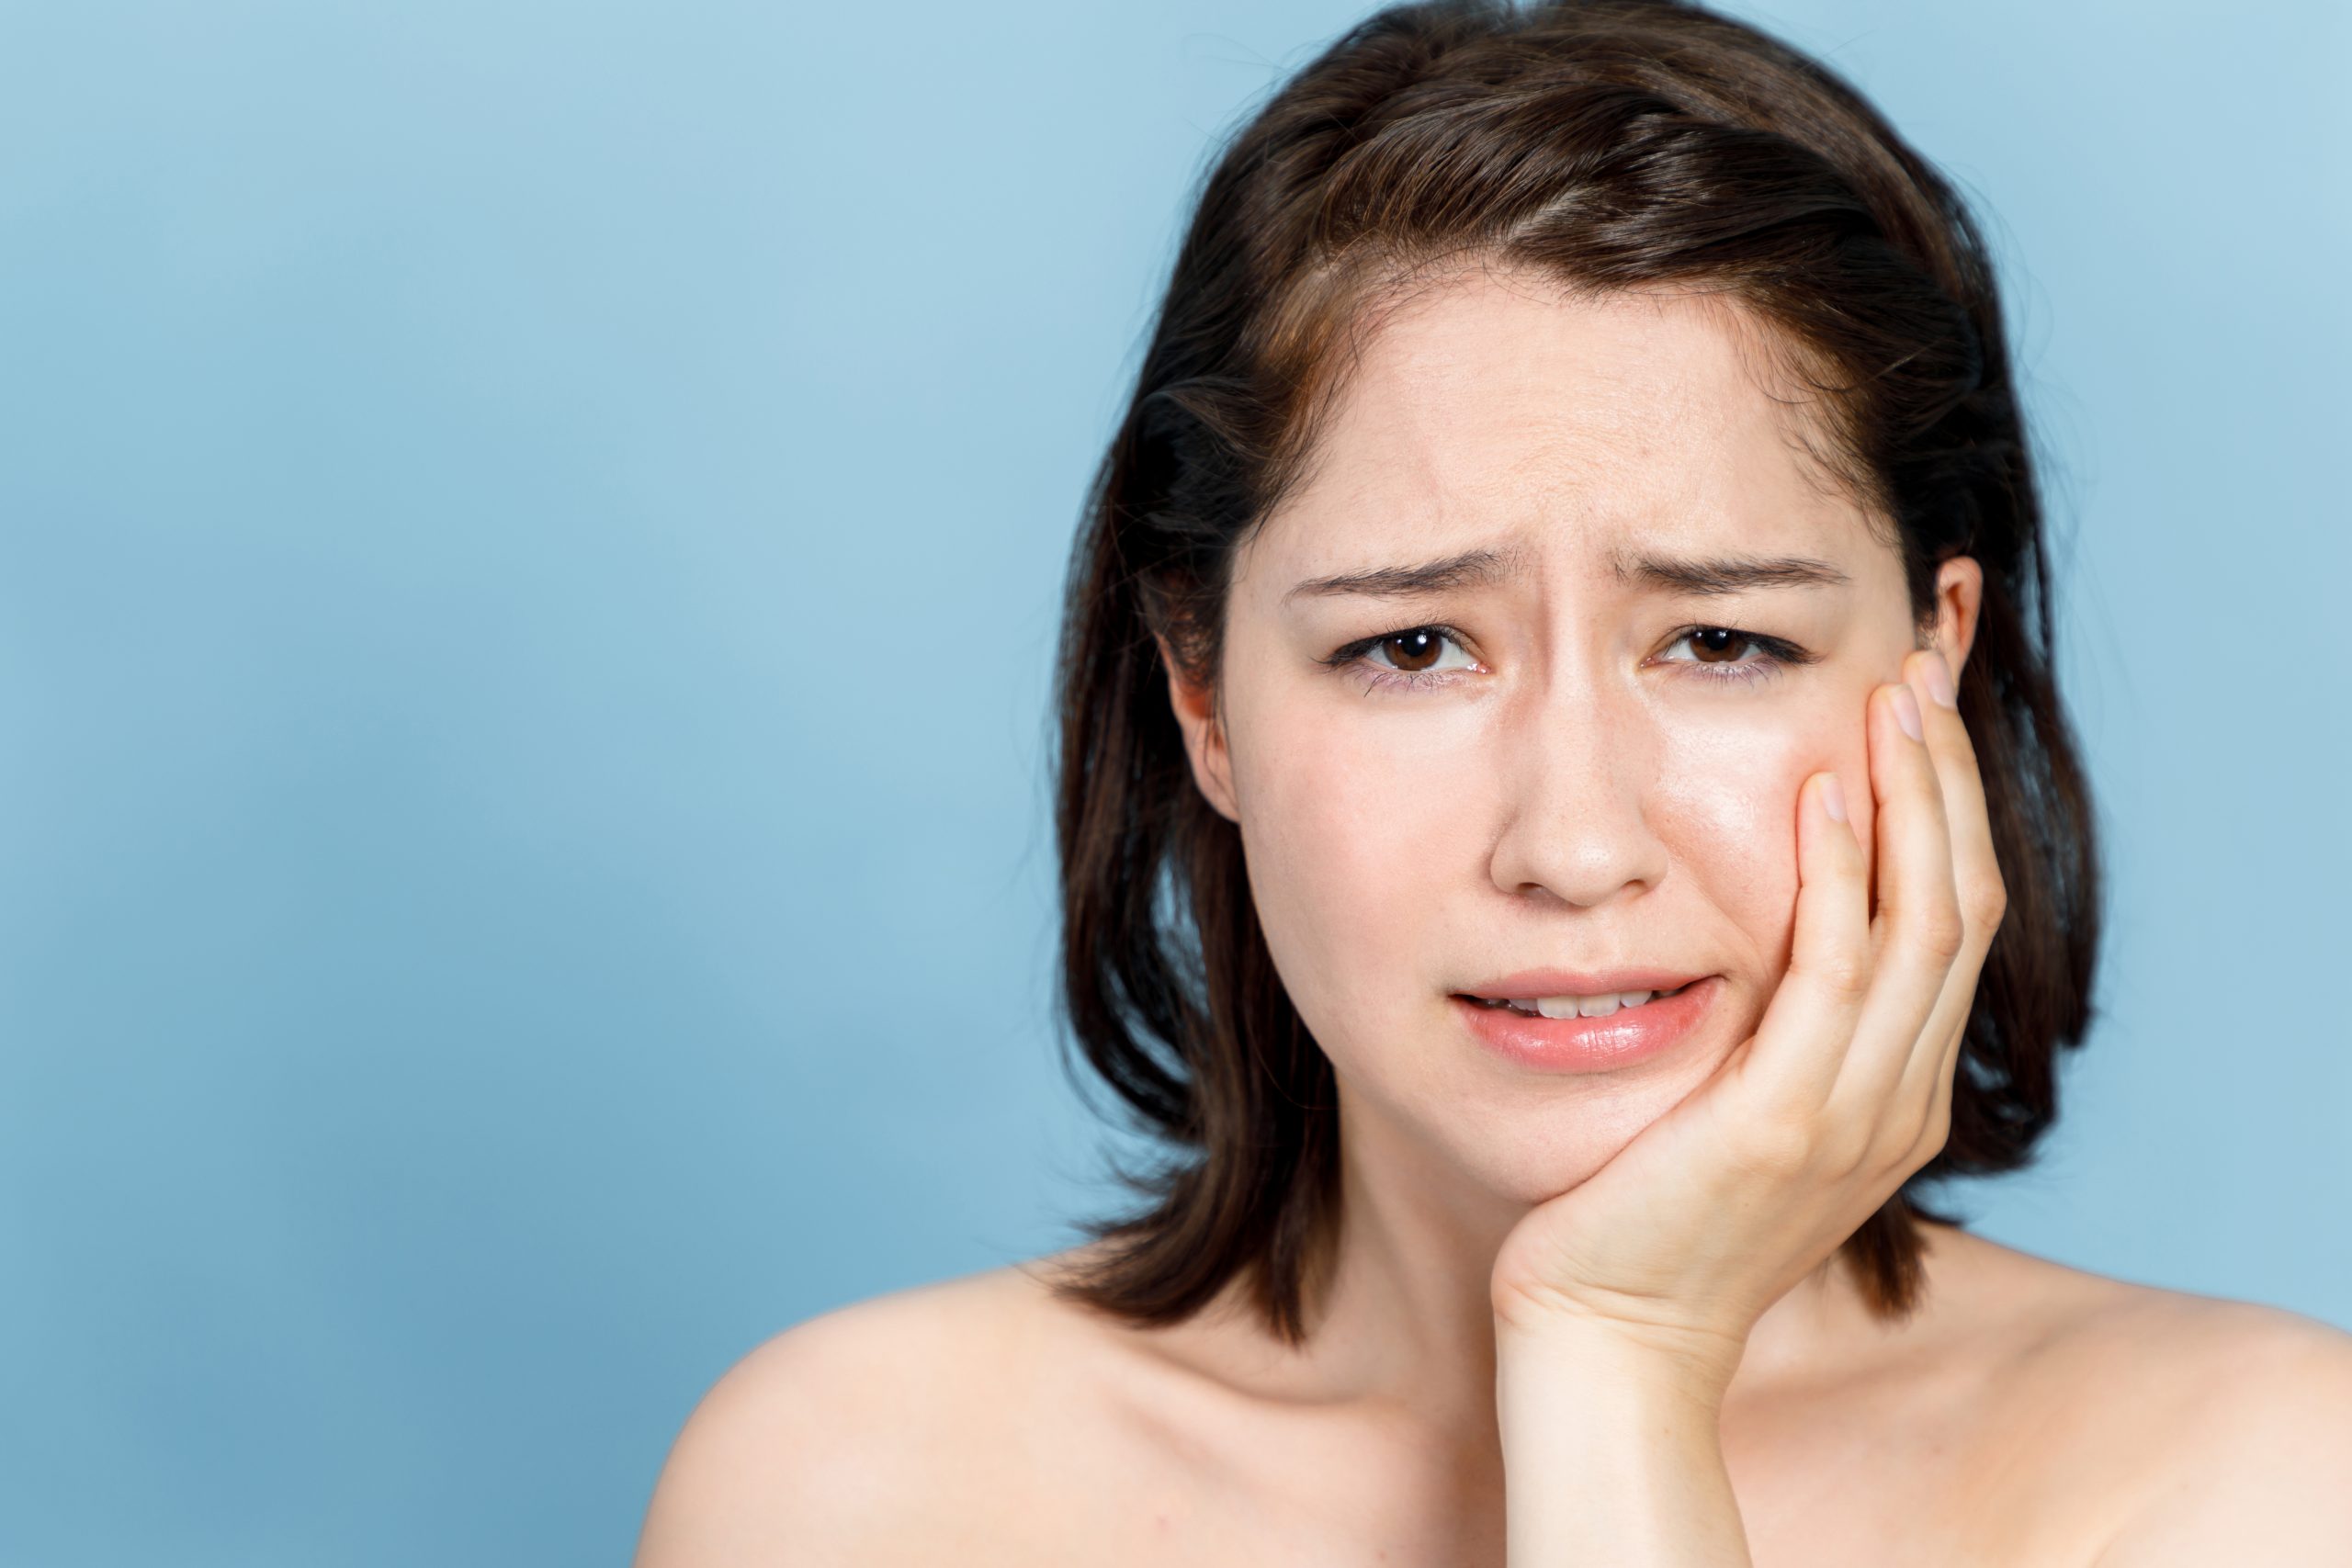 Wisdom Teeth Removal FAQs Calgary Family Dentist Tooth Extractions